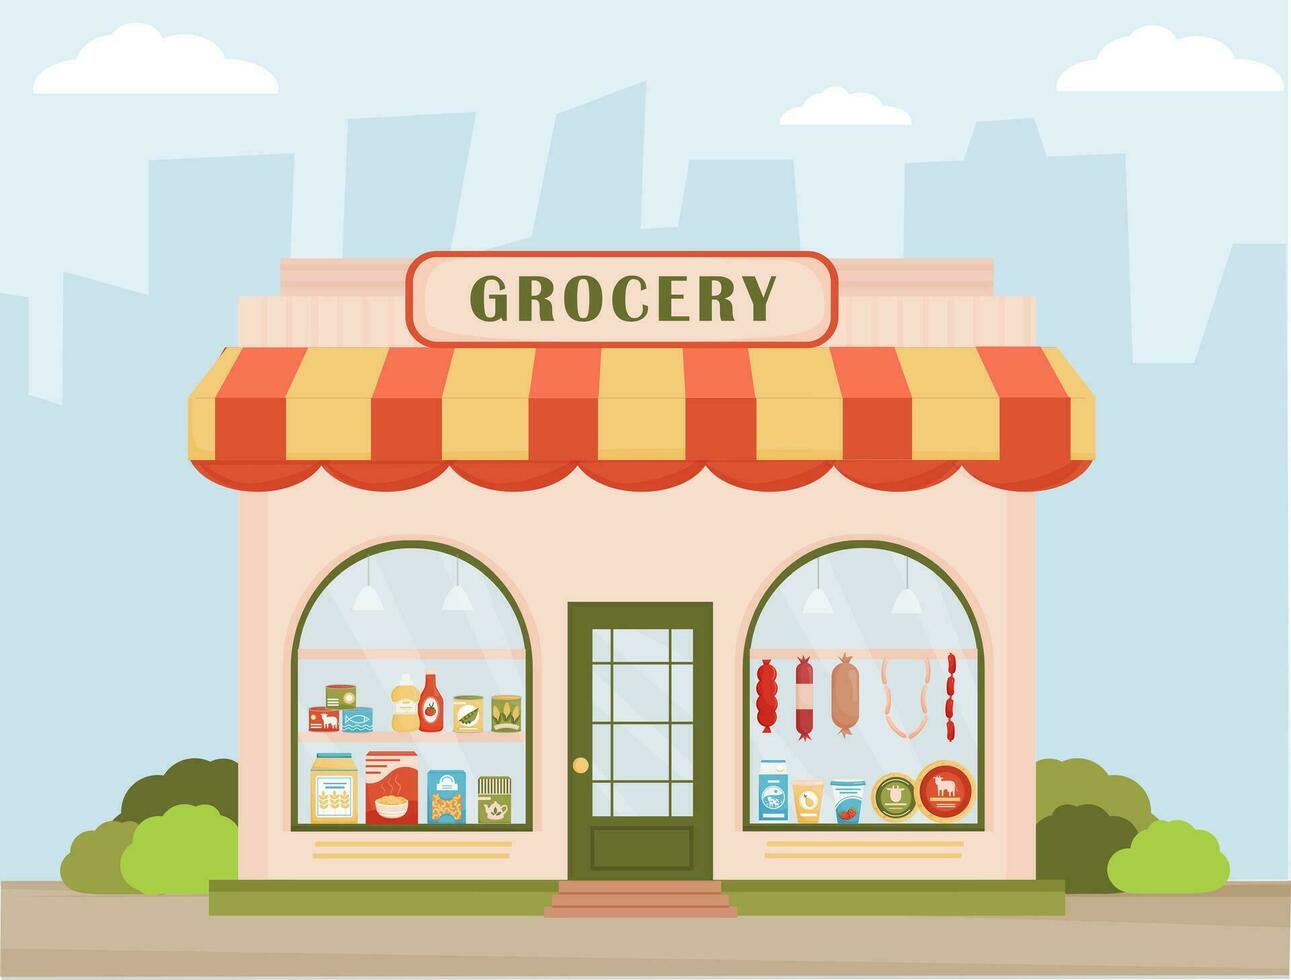 Grocery shop. Facade of a store. Grocery building facade on the street. Showcases with milk, cheese, sousage, canned food, cereal. . Flat vector illustration.